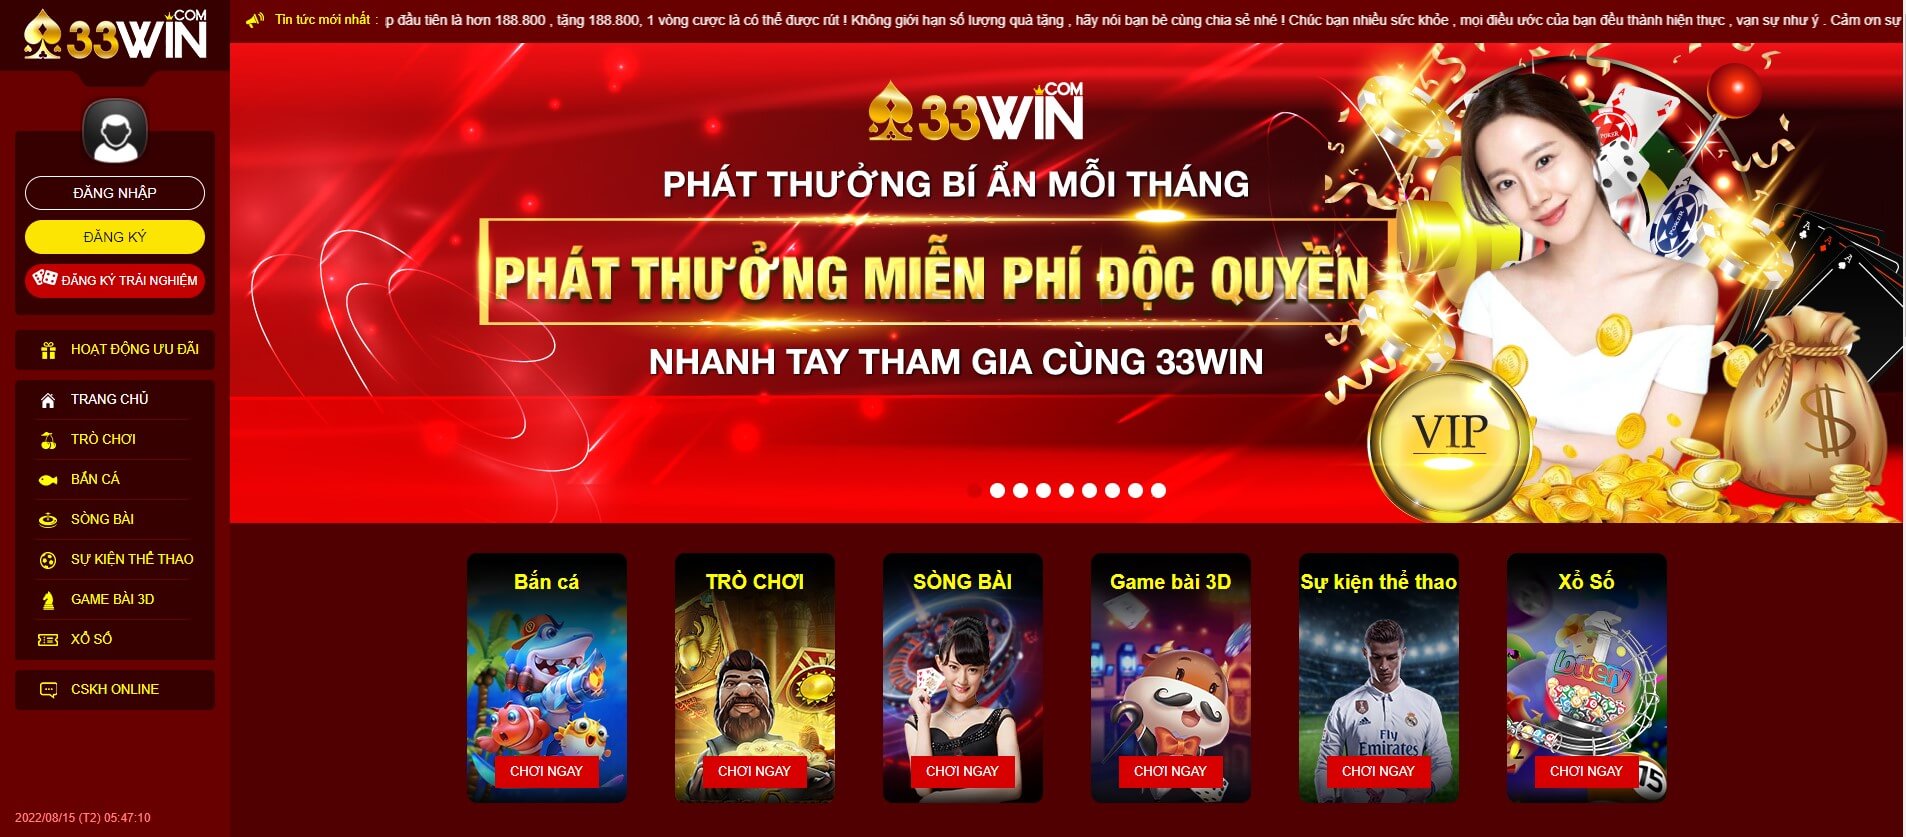 Cổng game 33WIN